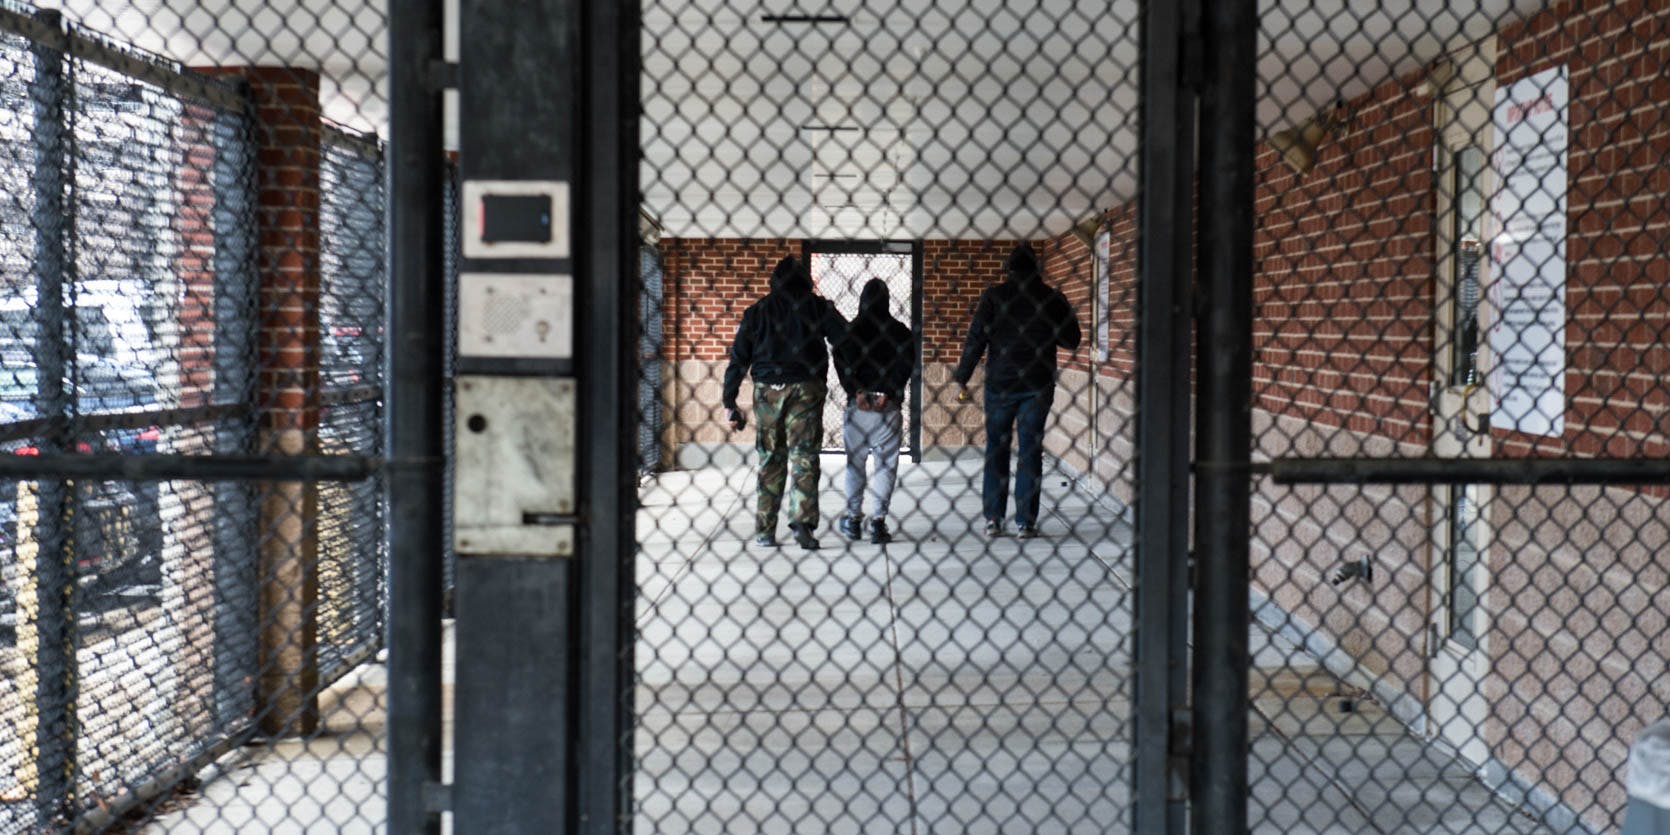 An inmate is escorted down the prison hallway. synthetic marijuana deaths in prison.